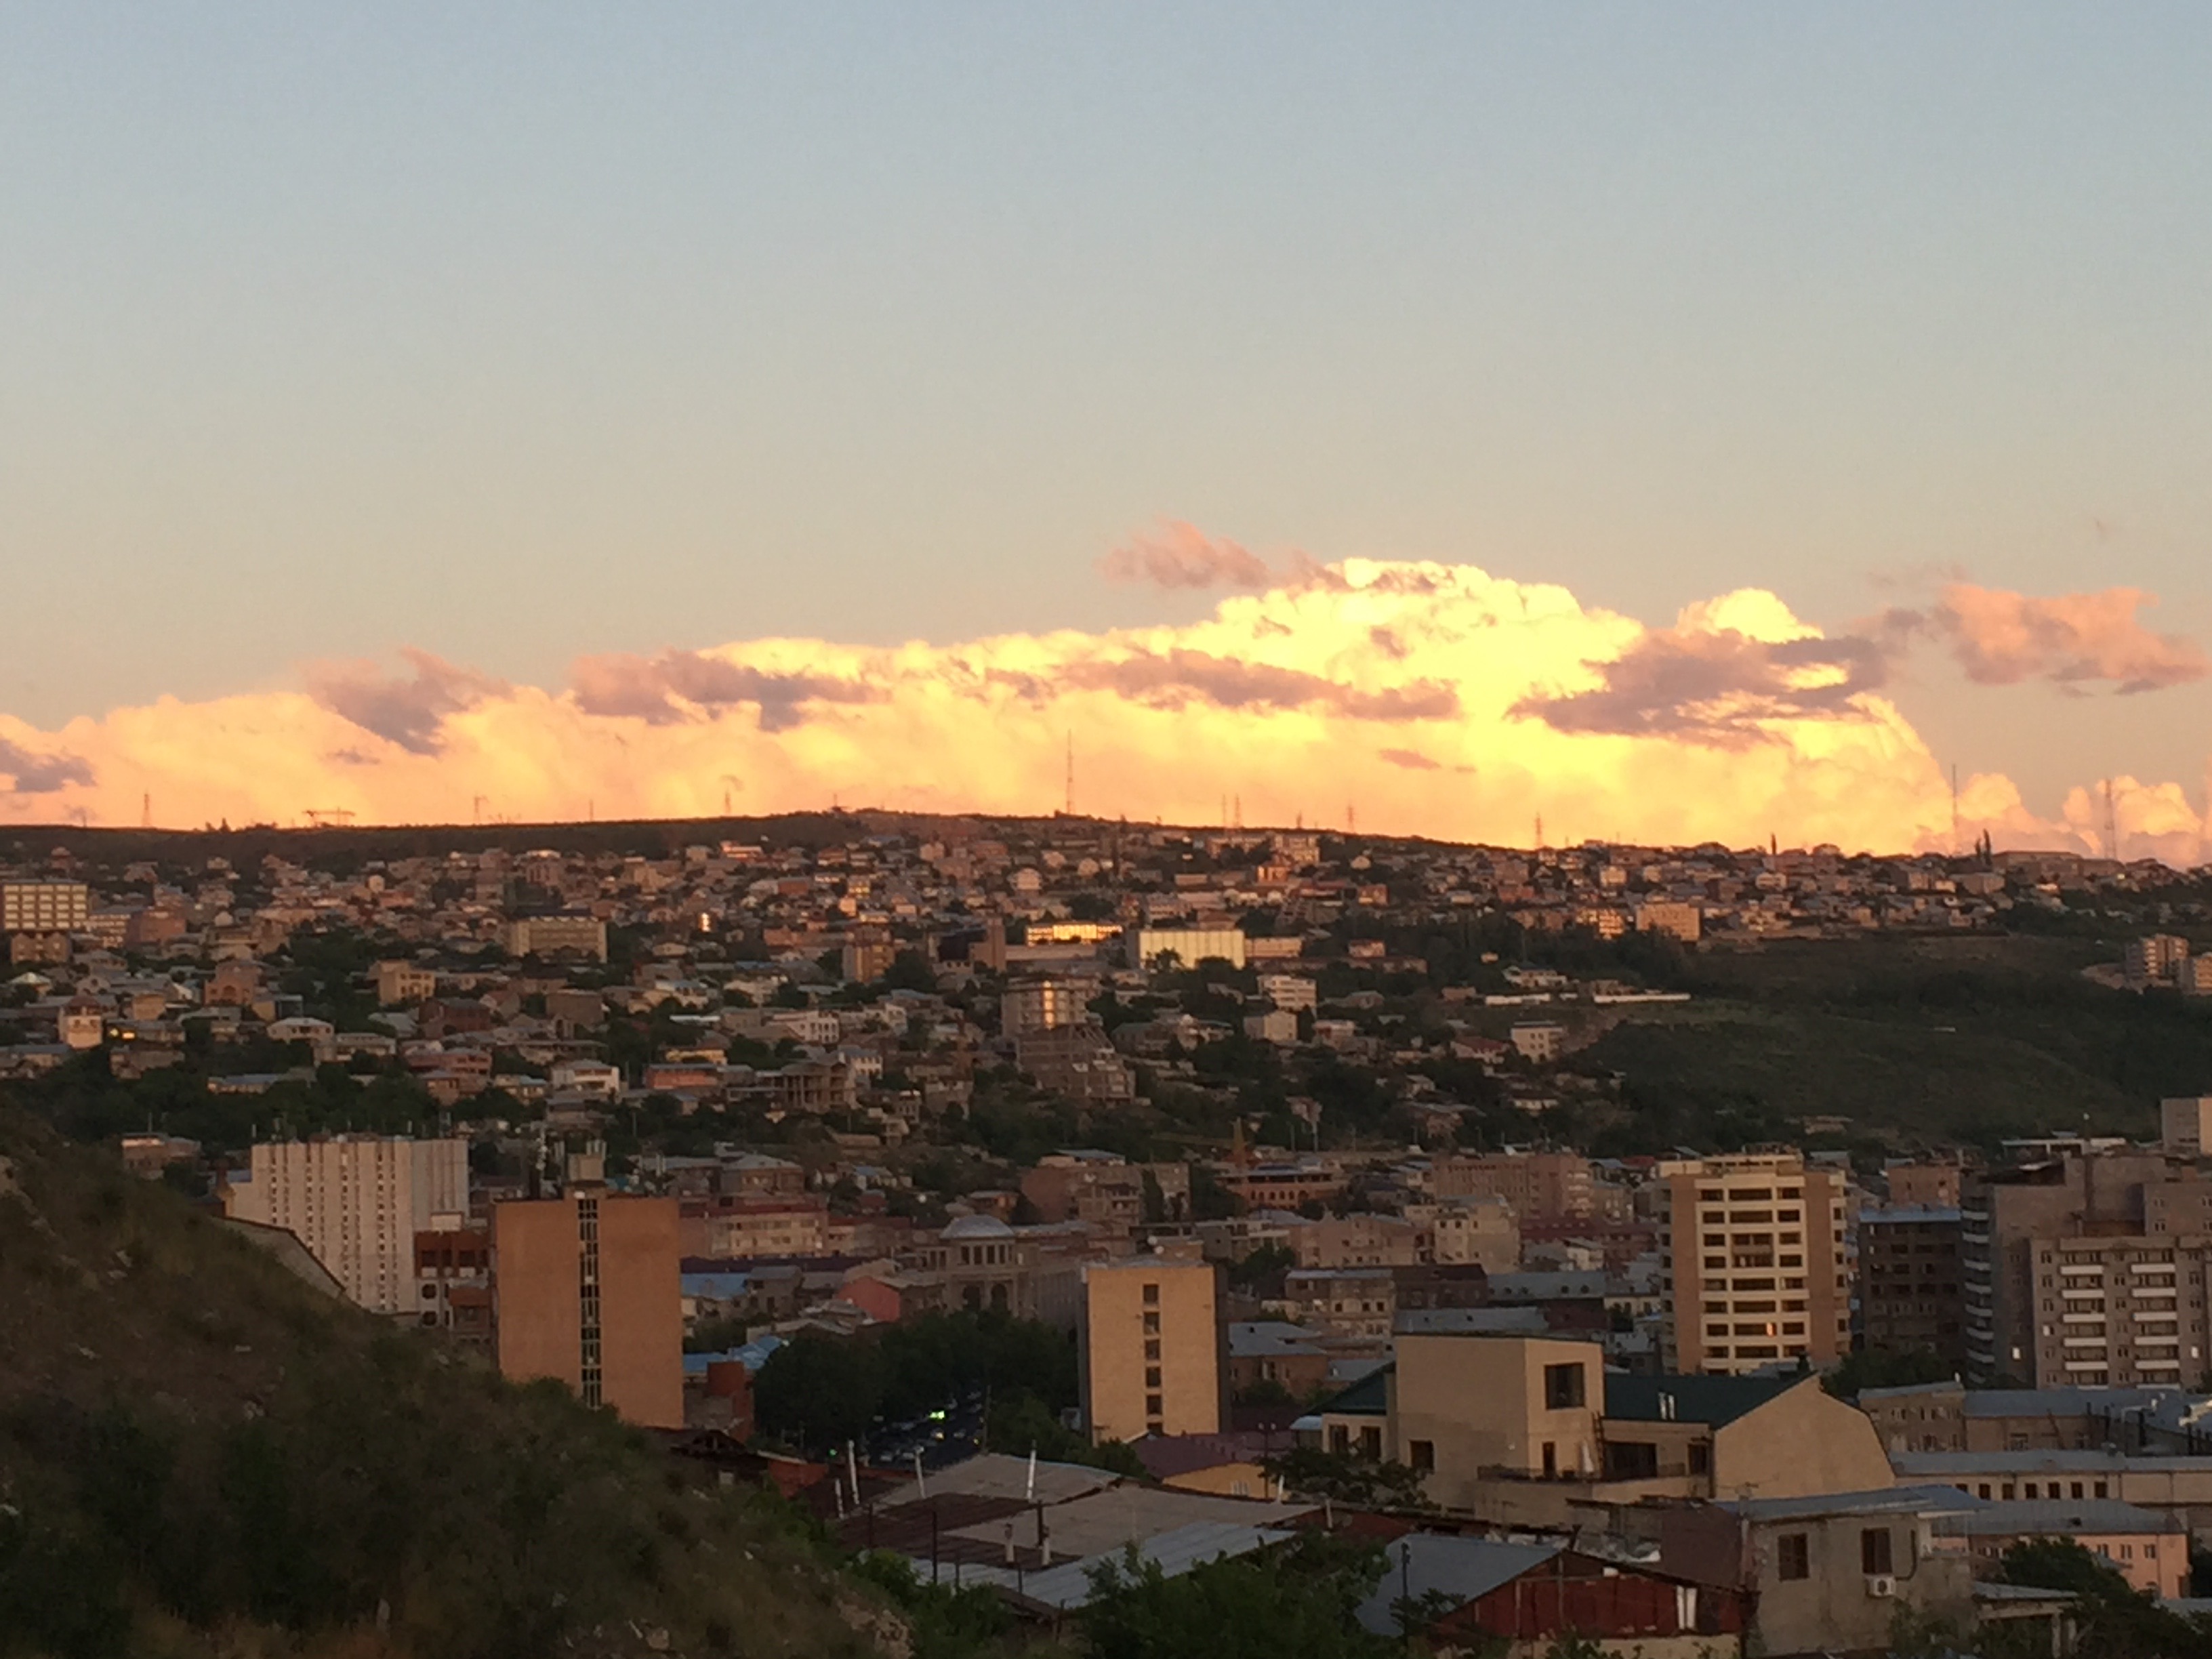 Sunset clouds over Yerevan